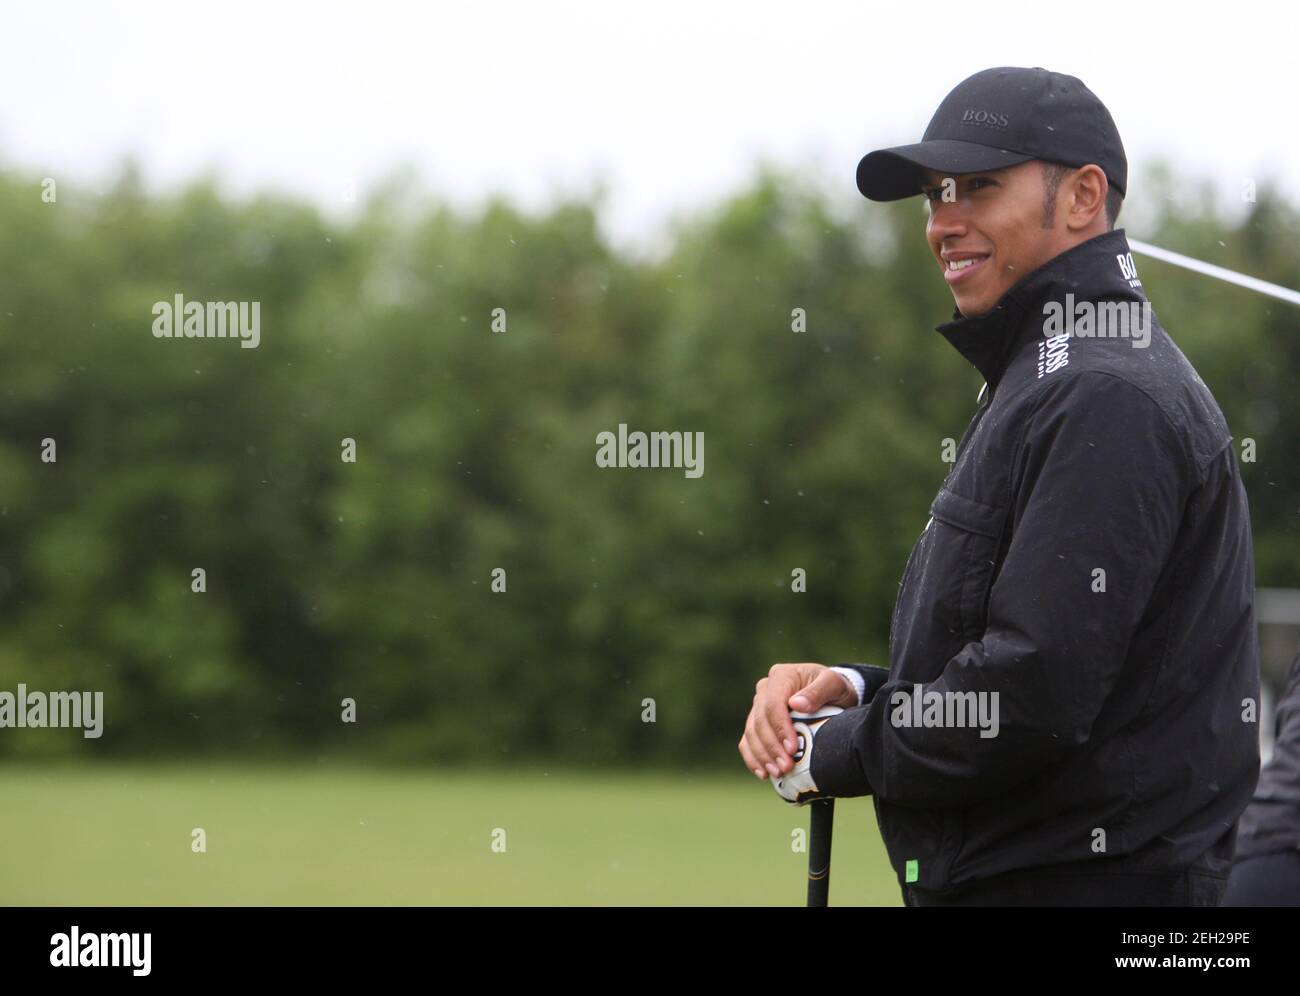 Golf - The European Open - The London Golf Club - 27/5/09 Formula One  driver Lewis Hamilton during the Pro Am Mandatory Credit: Action Images /  Paul Childs Stock Photo - Alamy